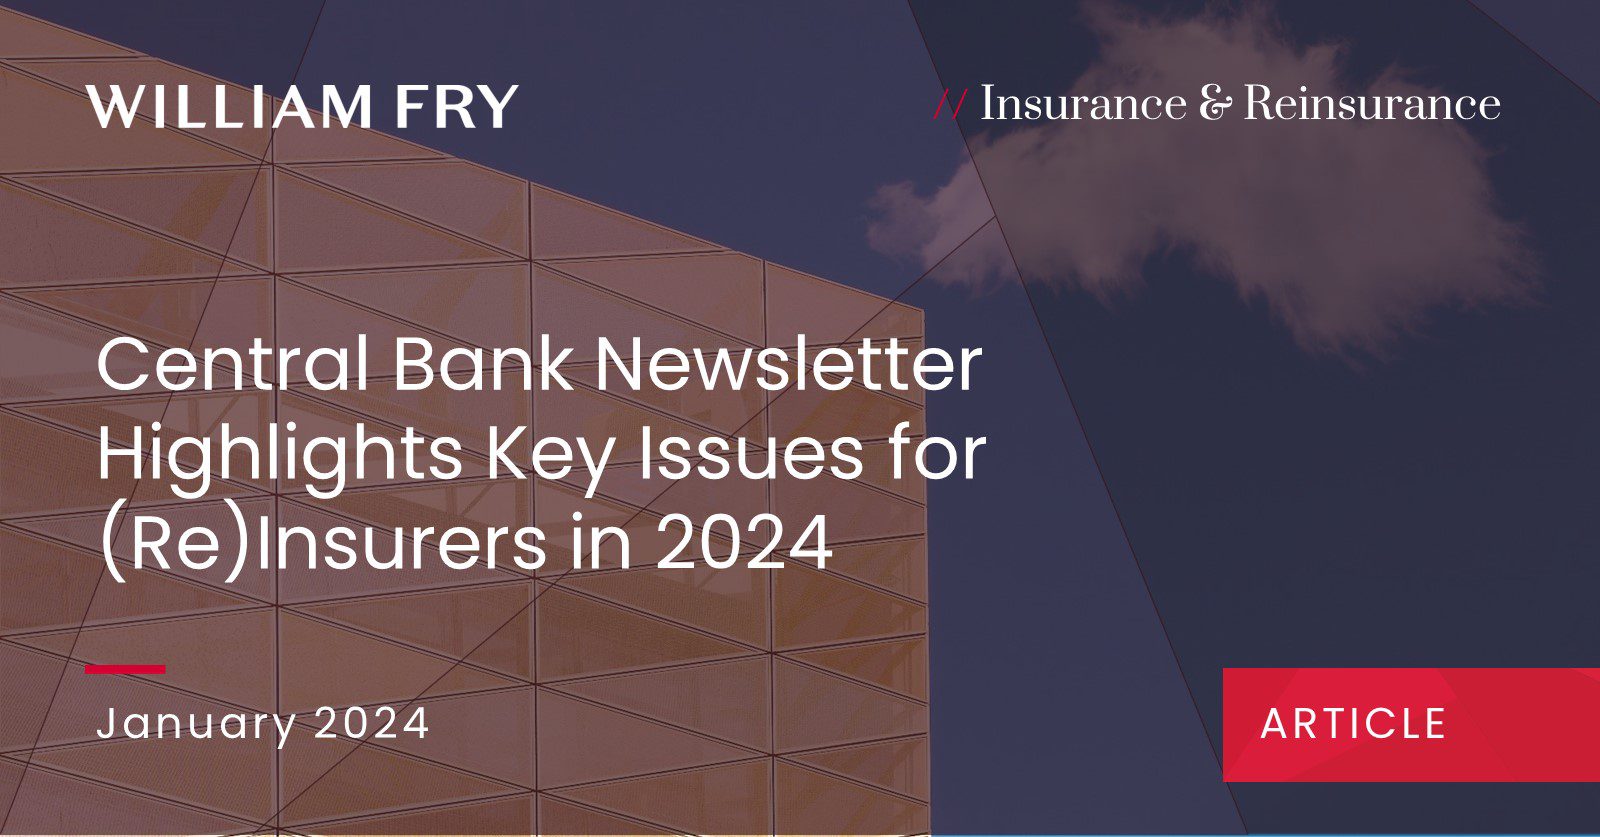 Central Bank Newsletter Highlights Key Issues for (Re)Insurers in 2024